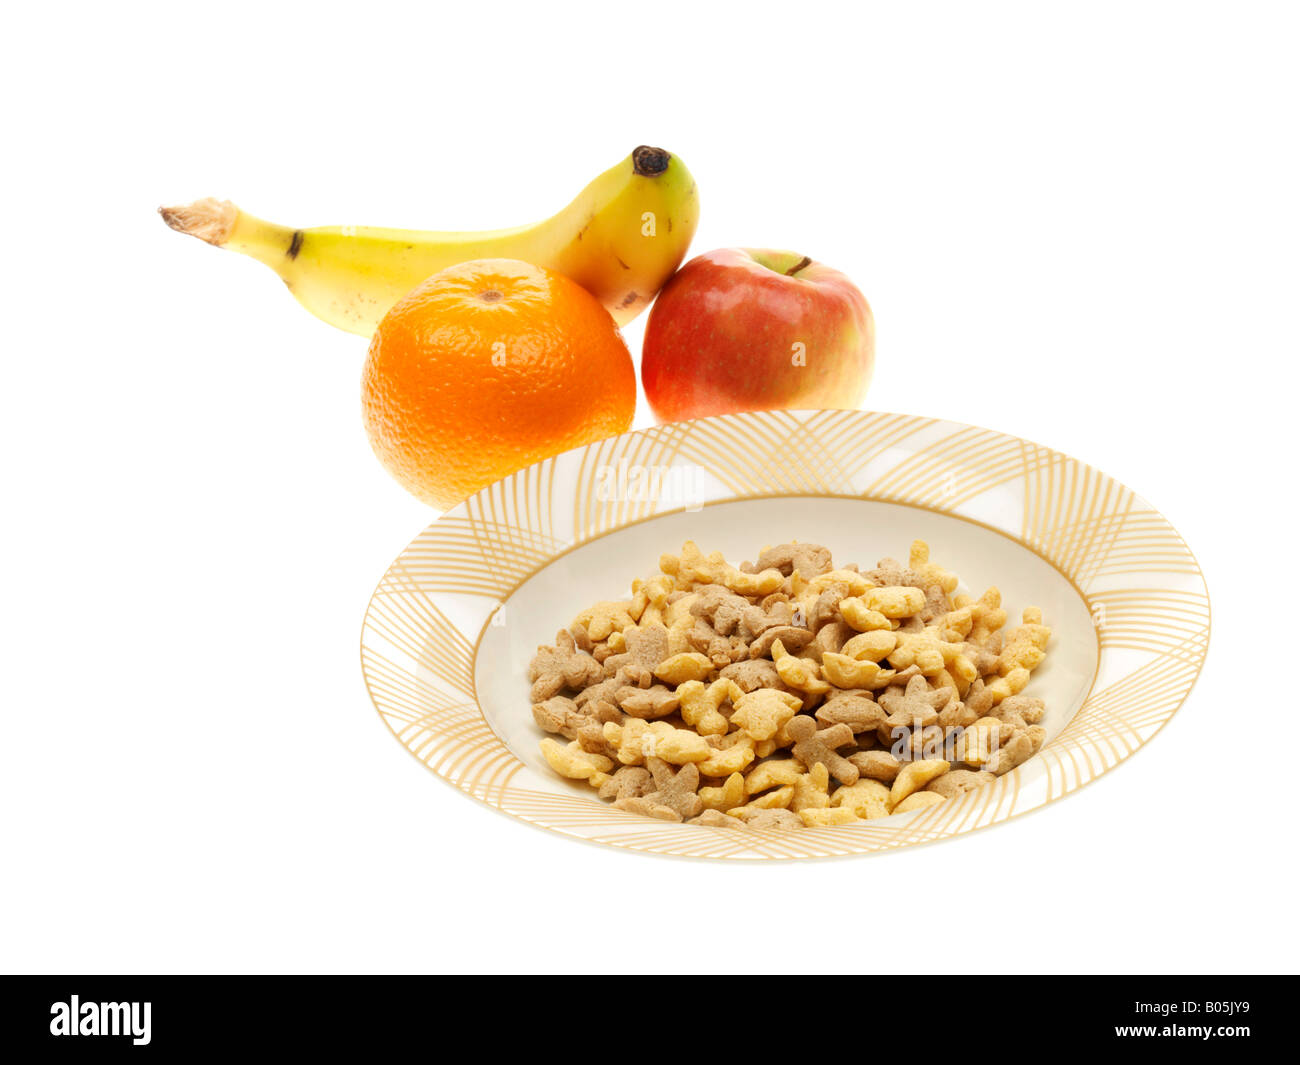 Rice breakfast cereal multi grain Cut Out Stock Images & Pictures - Alamy